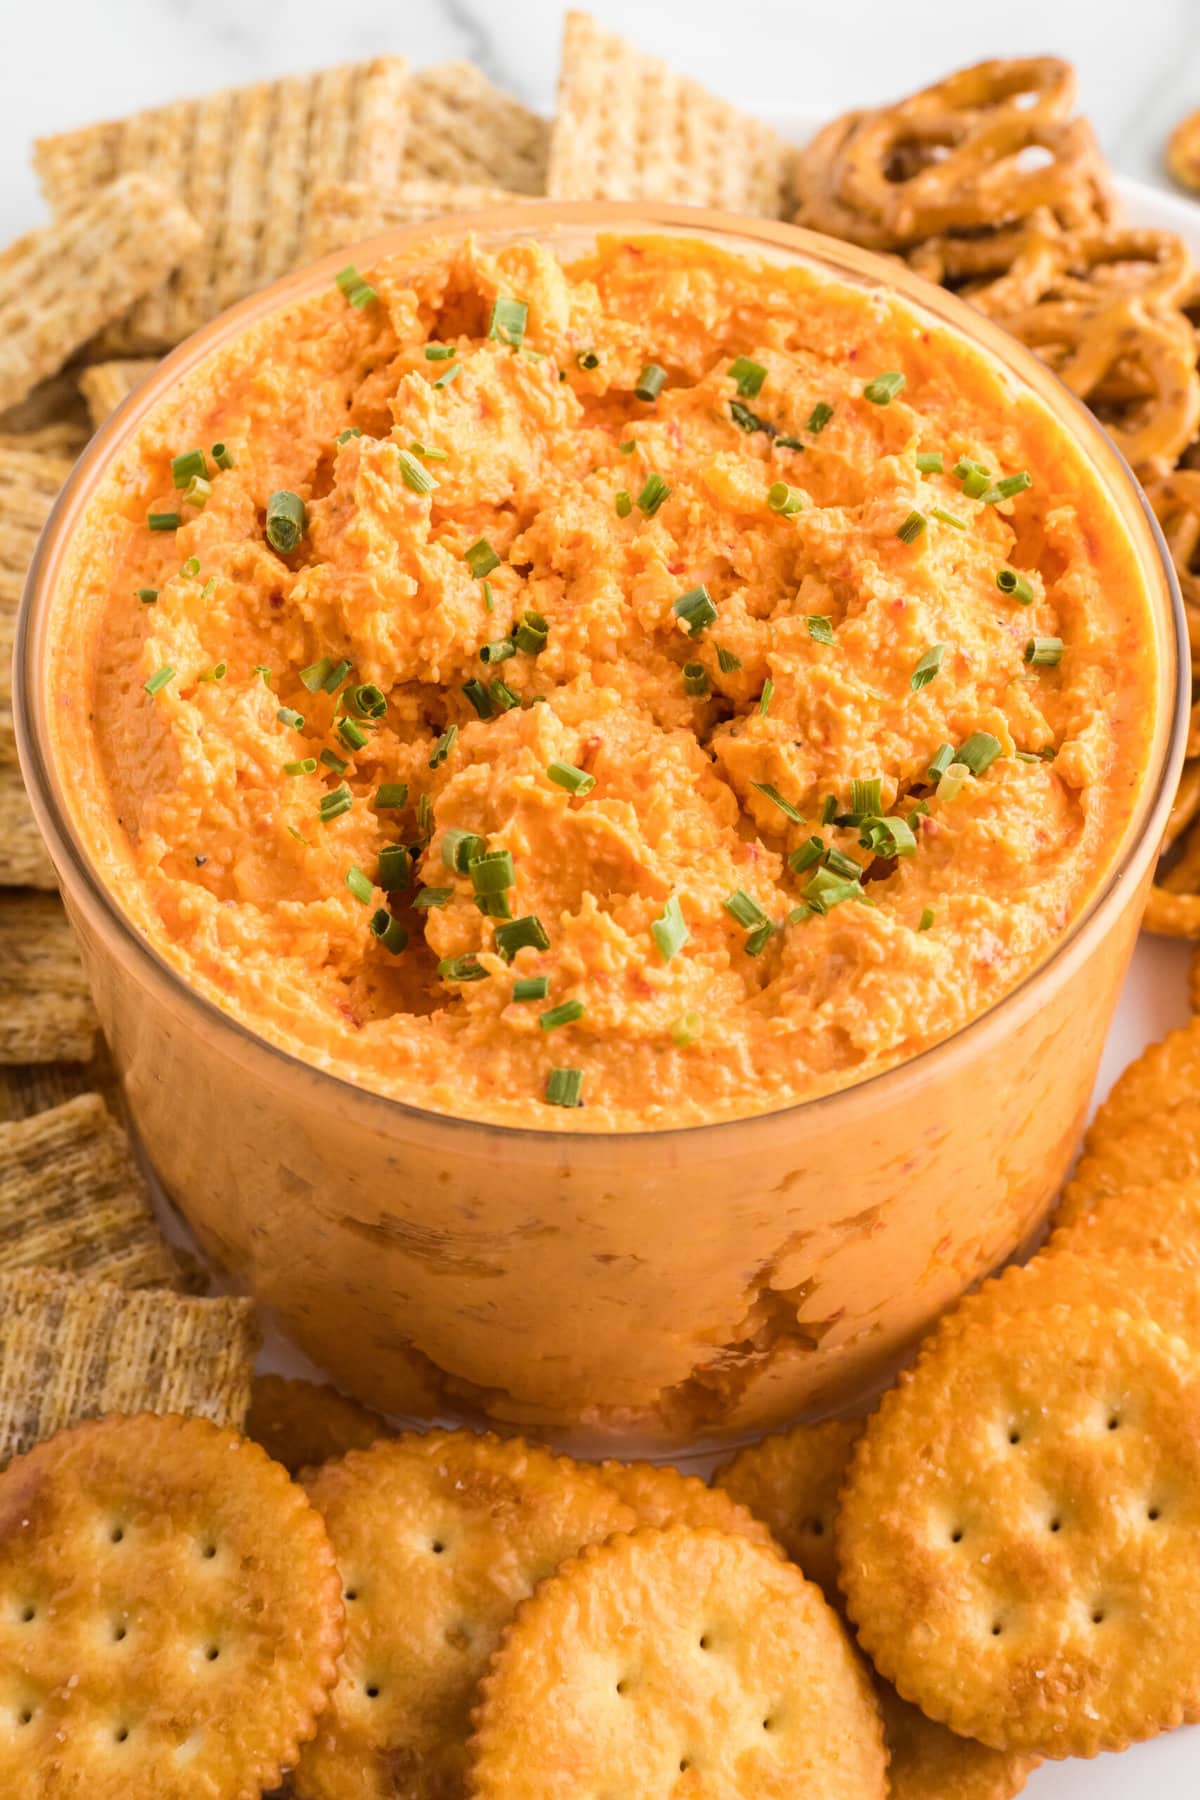 Homemade Pimento Cheese Recipe - Kitchen Fun With My 3 Sons